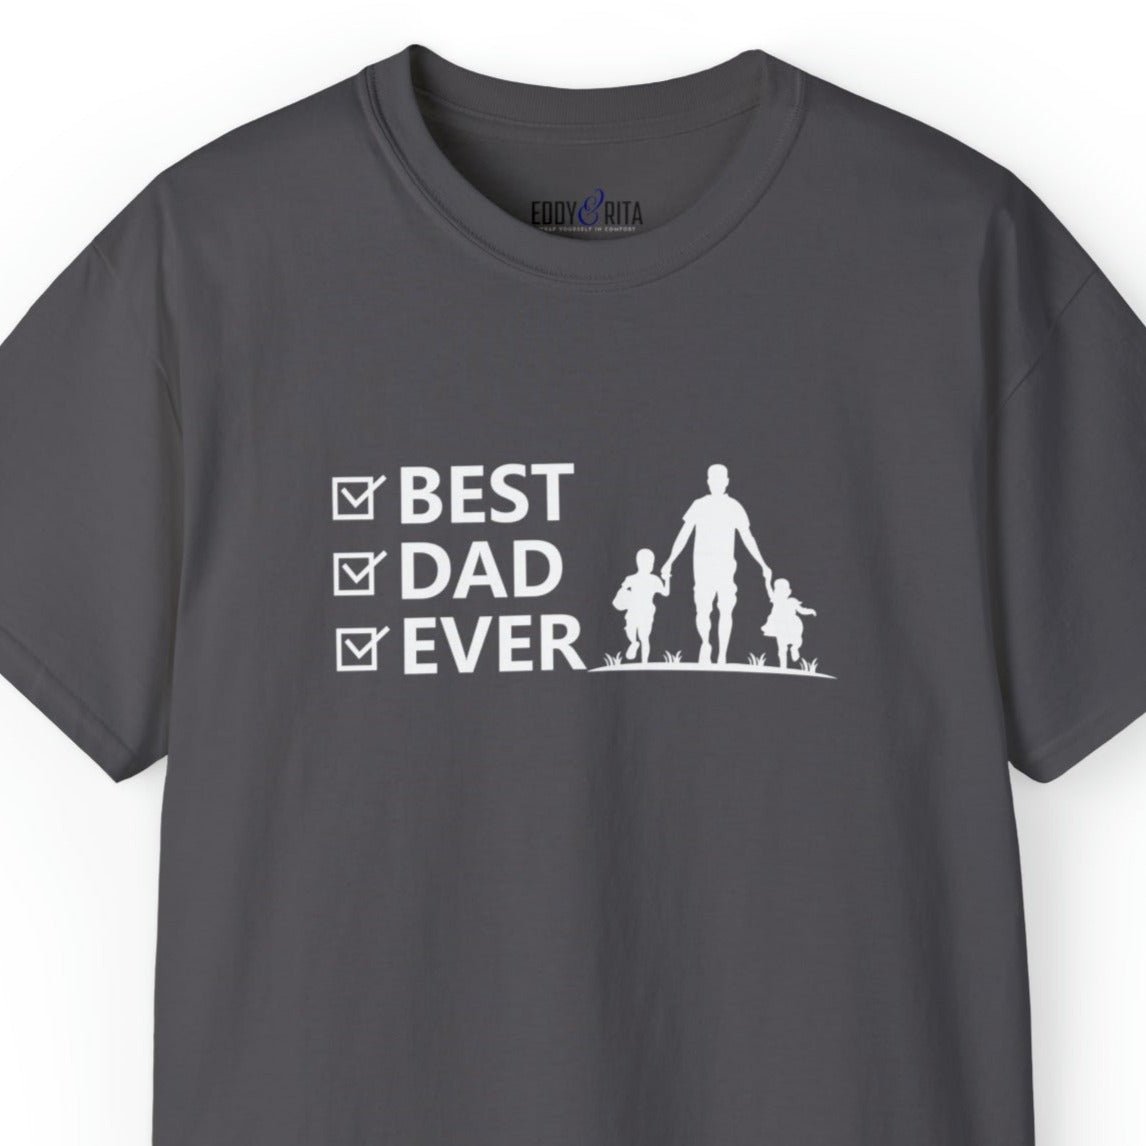 Best Dad Ever Father and Children Men's Tee - Stylish and Heartfelt Shirt - Eddy and Rita